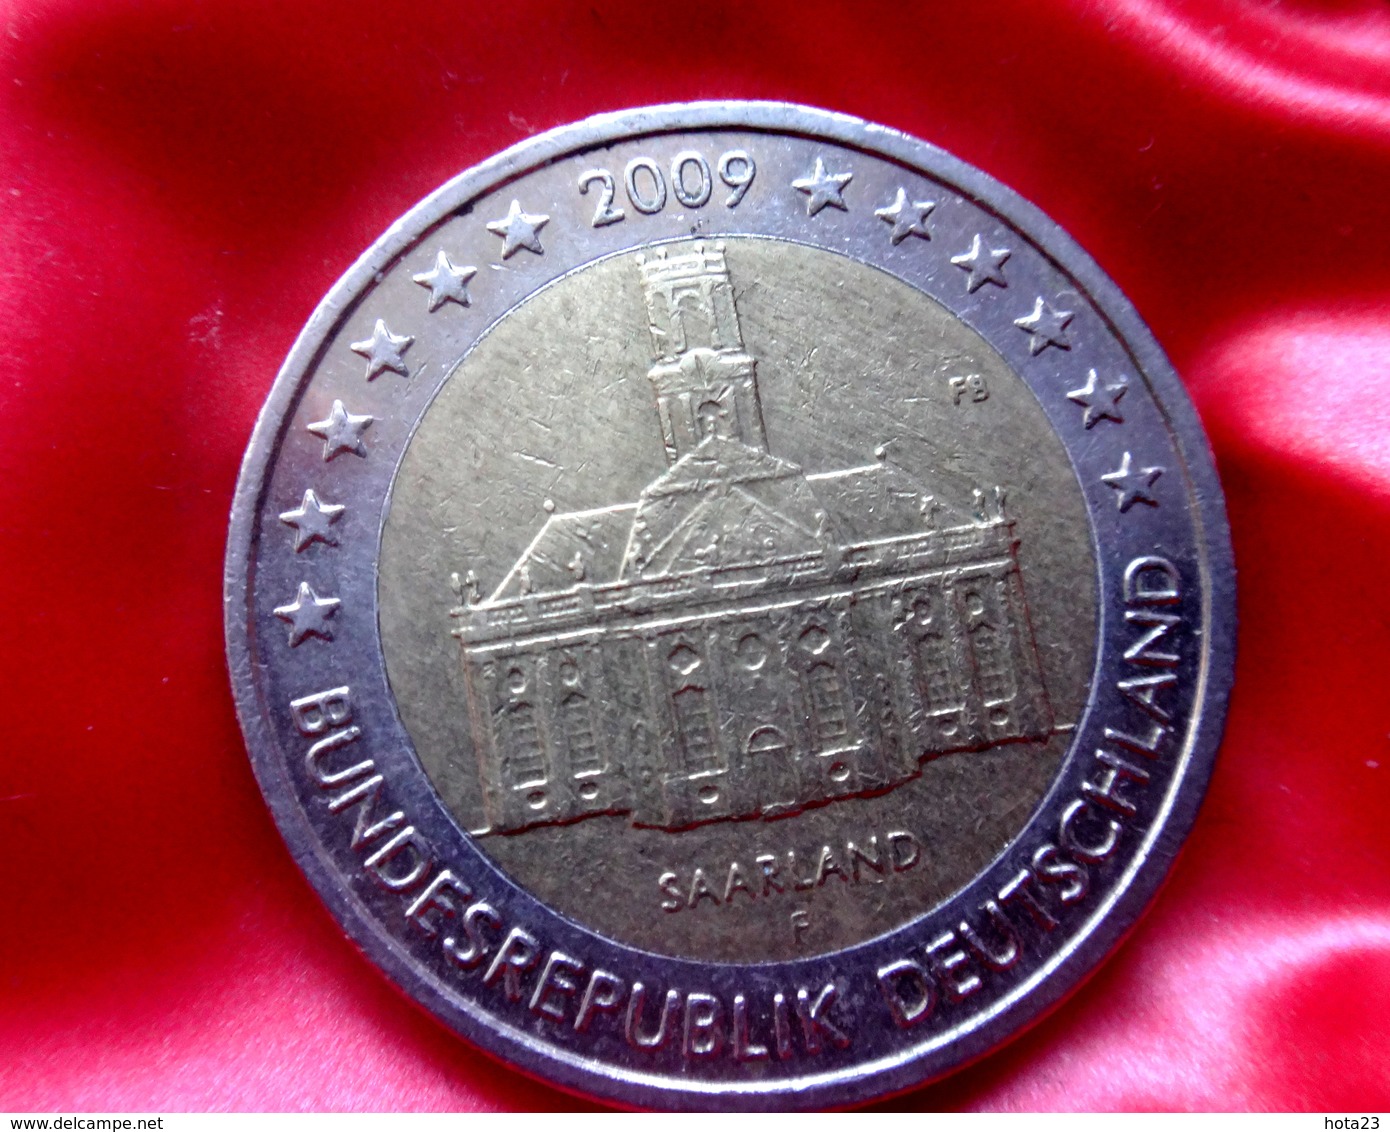 Germany 2 Euro -  F -  Coin 2009  Saarland " Ludwigskirche " Coin CIRCULATED - Deutschland